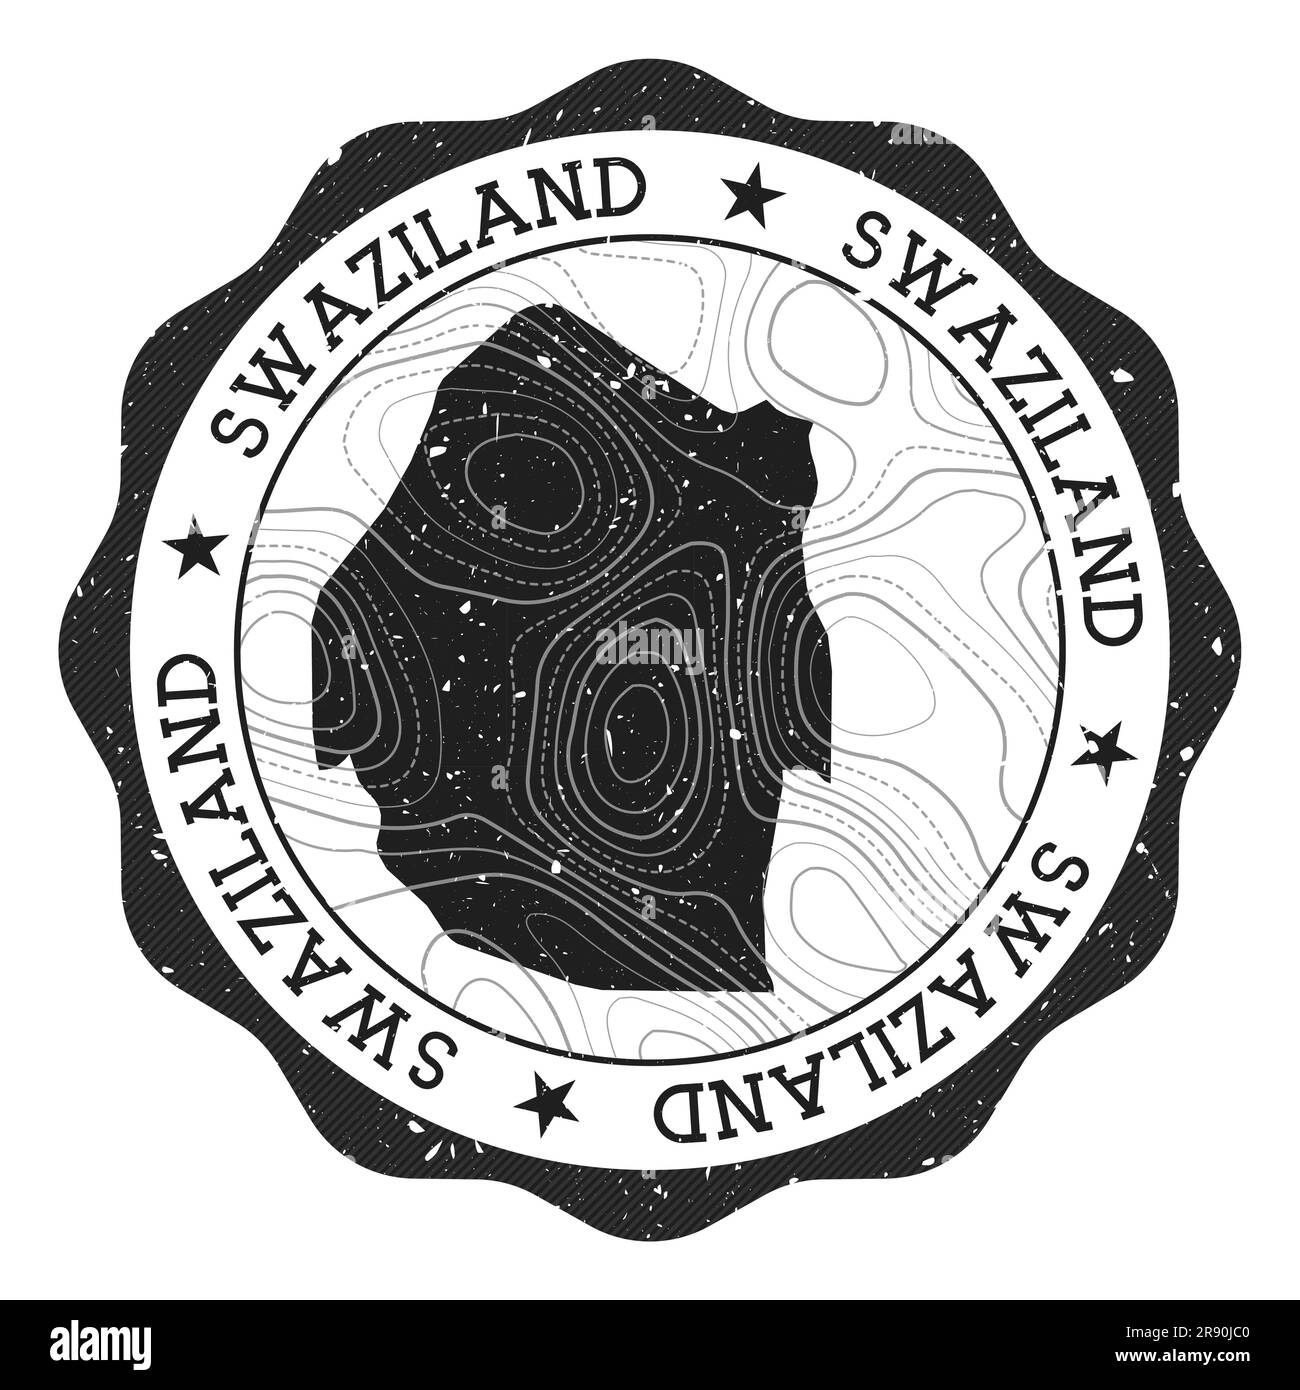 Swaziland outdoor stamp. Round sticker with map of country with topographic isolines. Vector illustration. Can be used as insignia, logotype, label, s Stock Vector